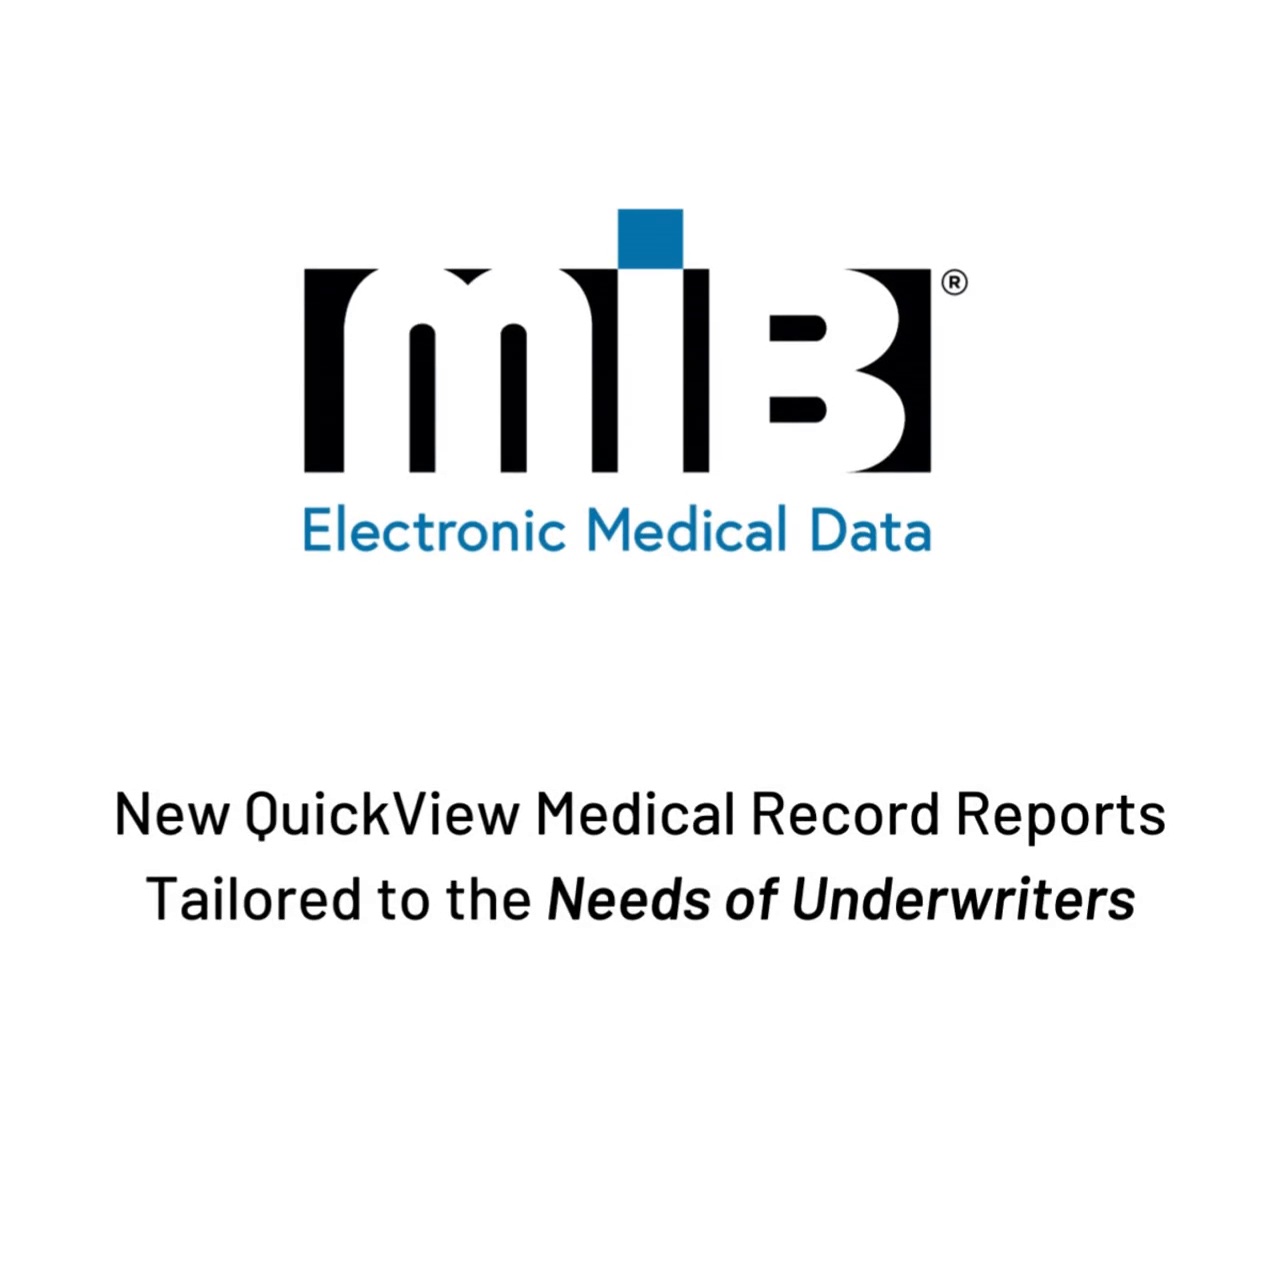 New Medical Record Reports Tailored to the Needs of Underwriters